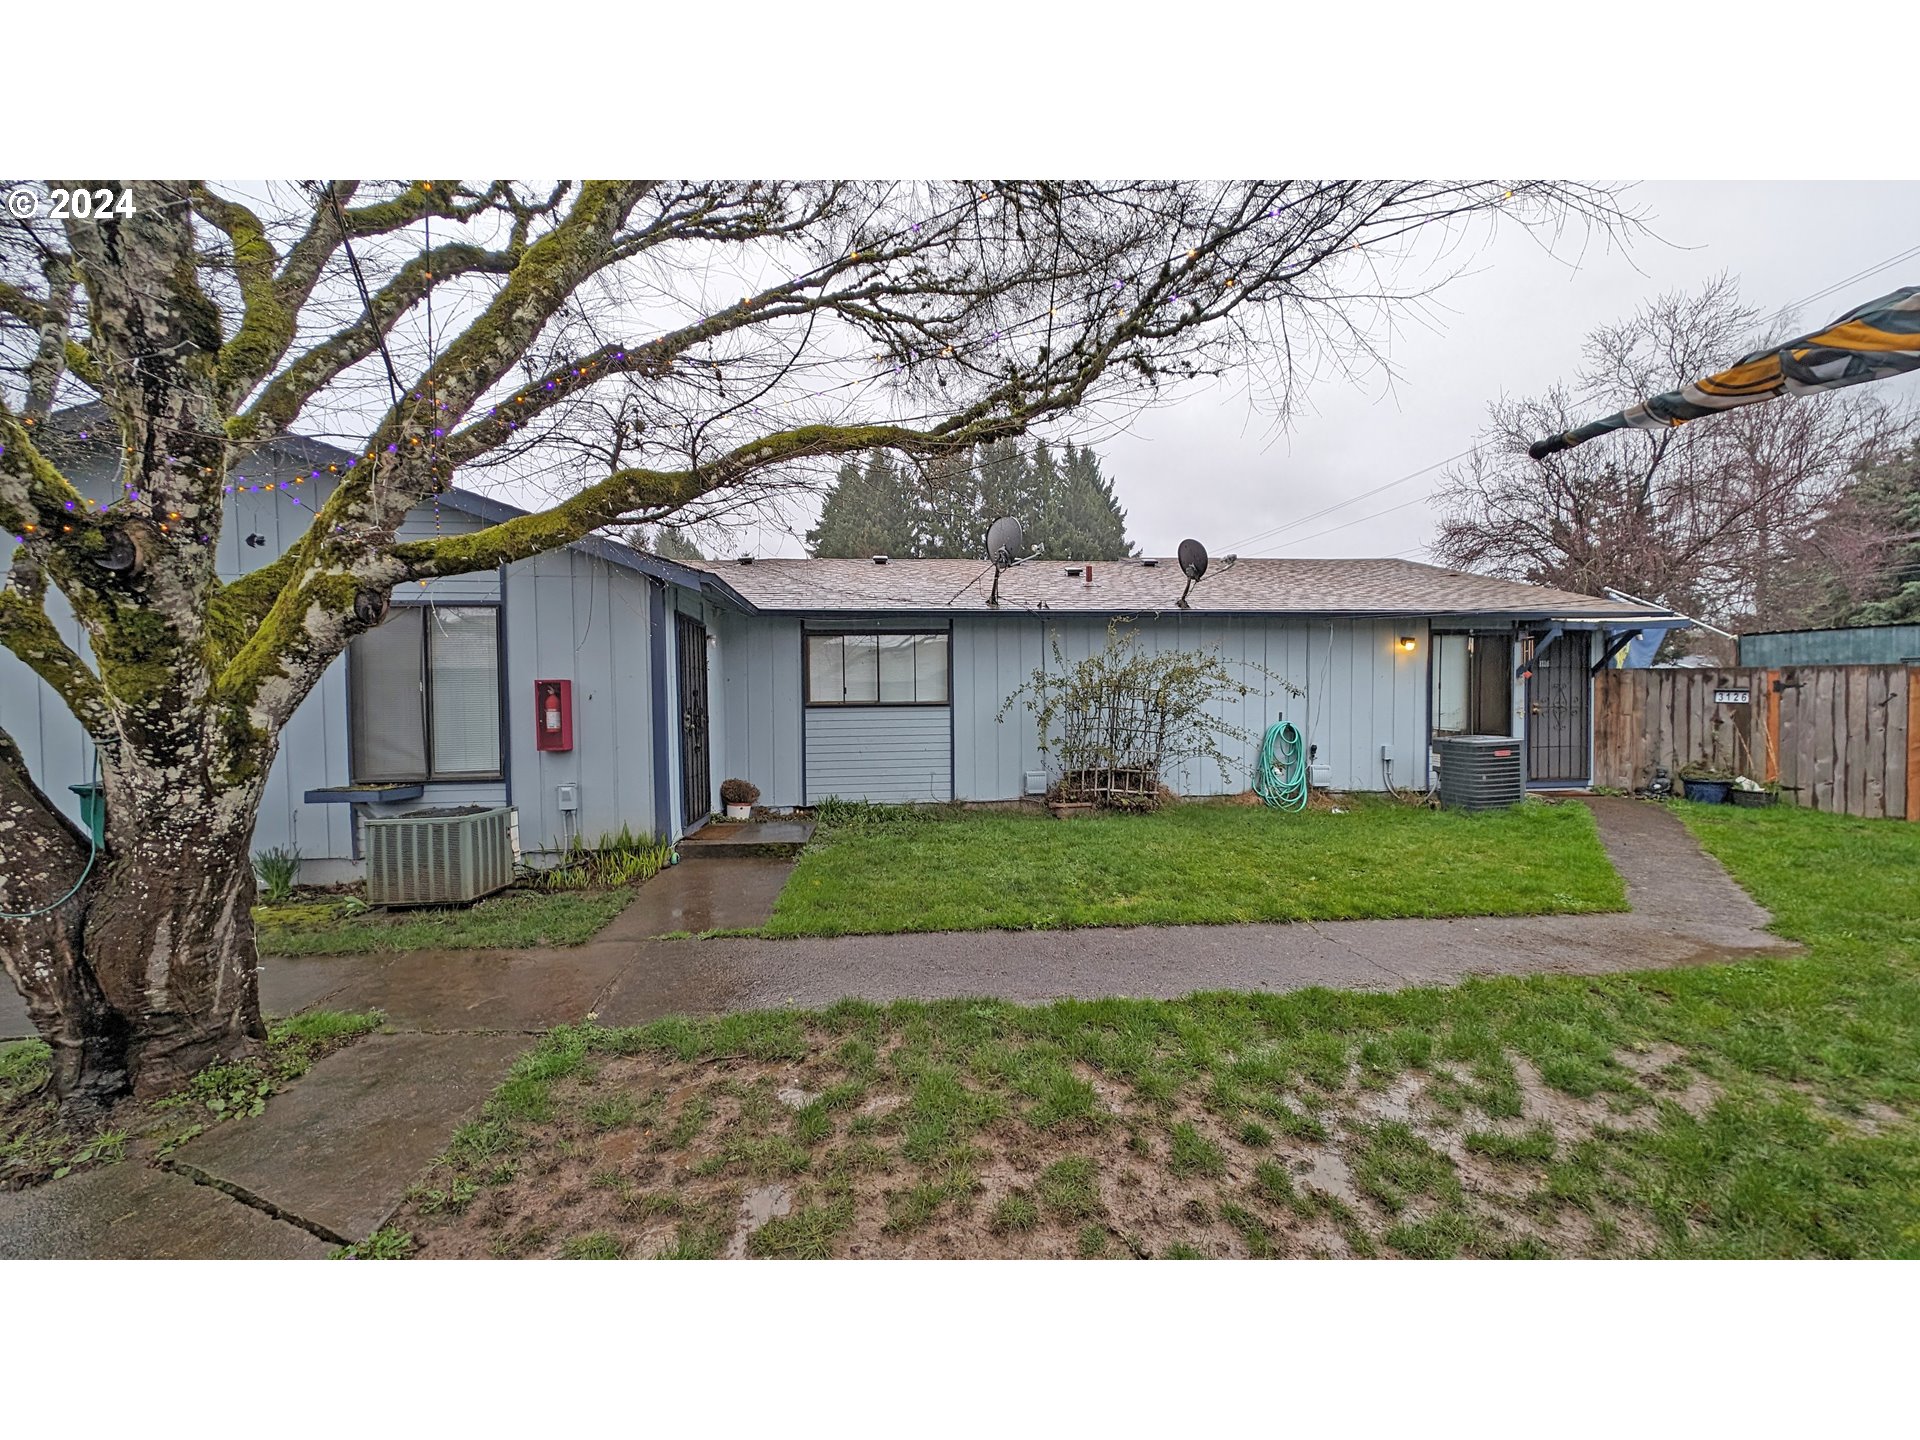 3118 BRITTANY DR, Forest Grove, OR 97116